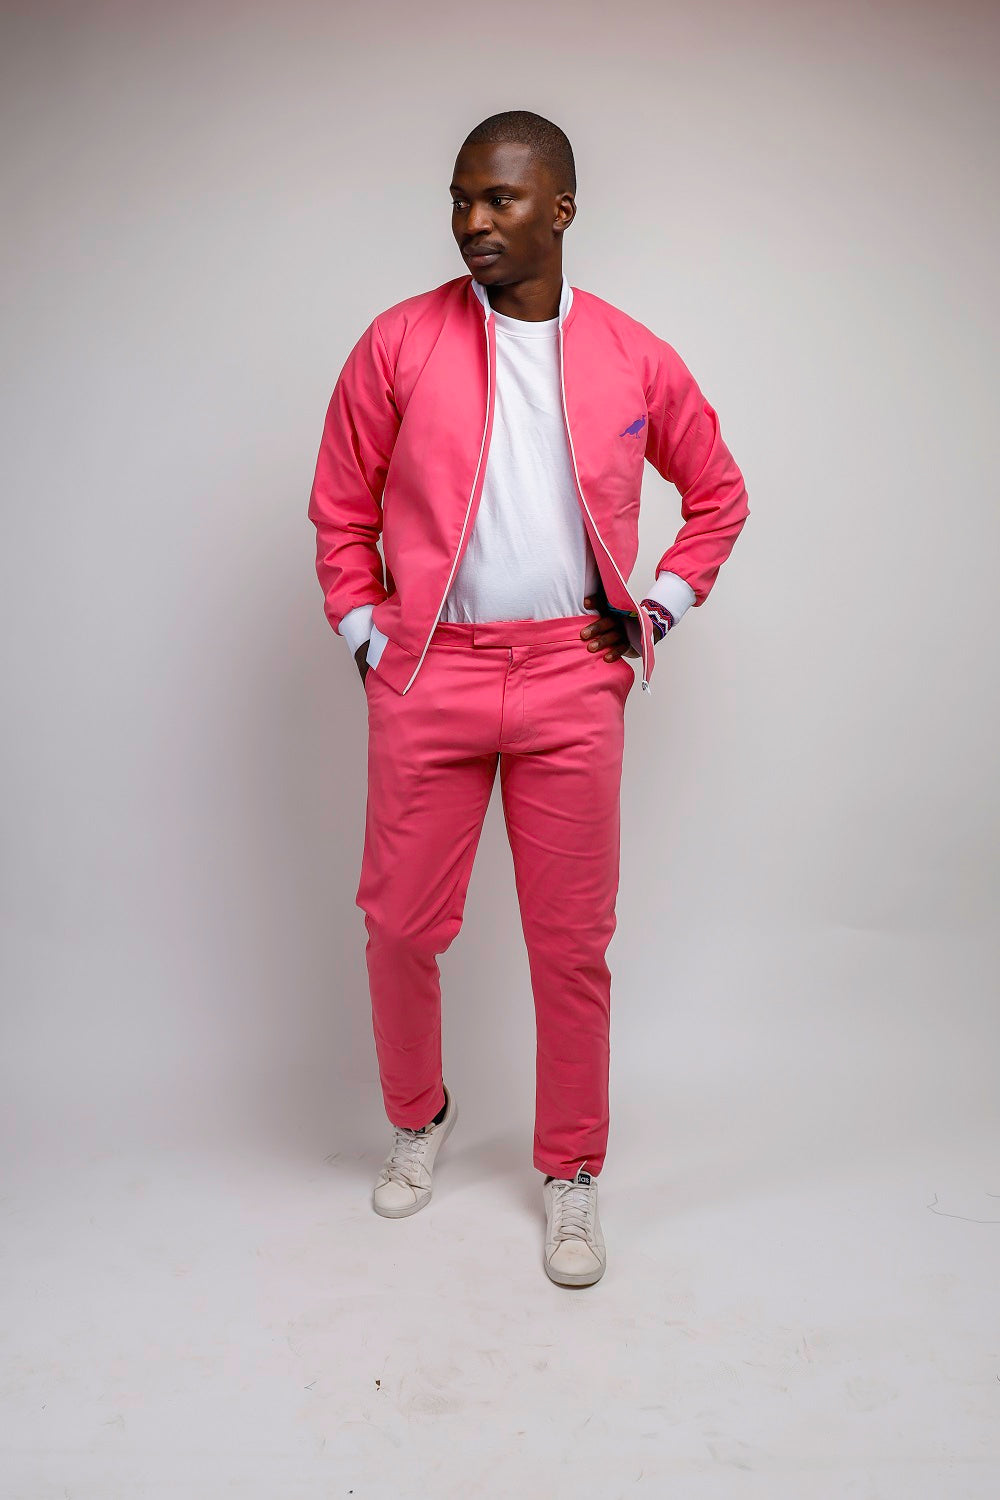 Hot Pink Bomber Suit - GENTEEL - Image Is Half The Story Told